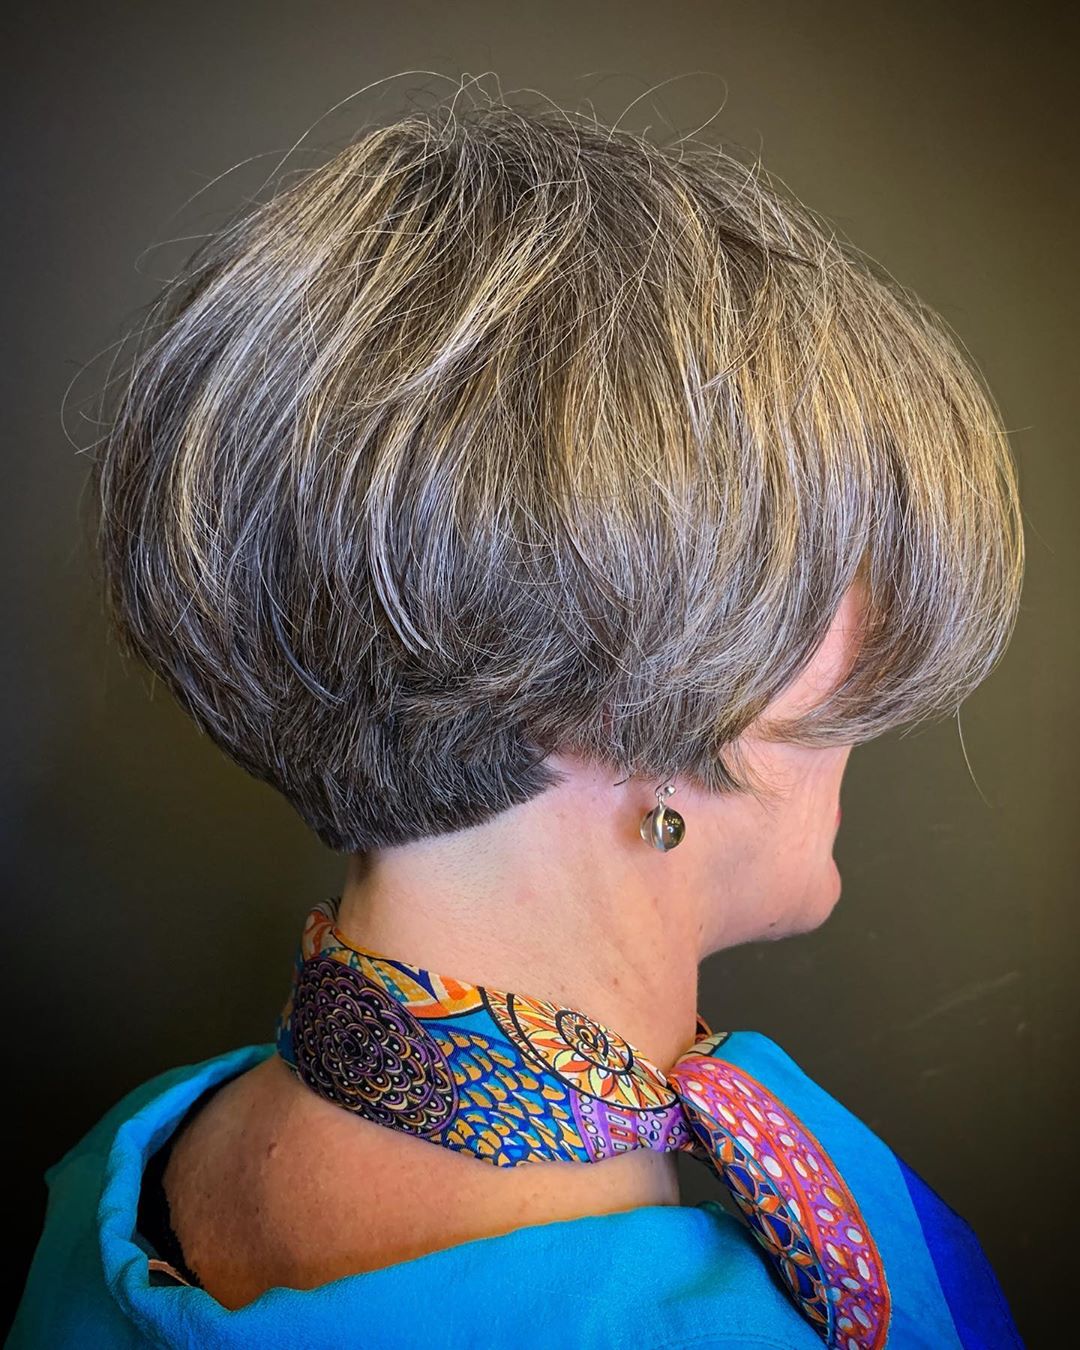 15 Flattering Bob Haircuts for Women Over 50